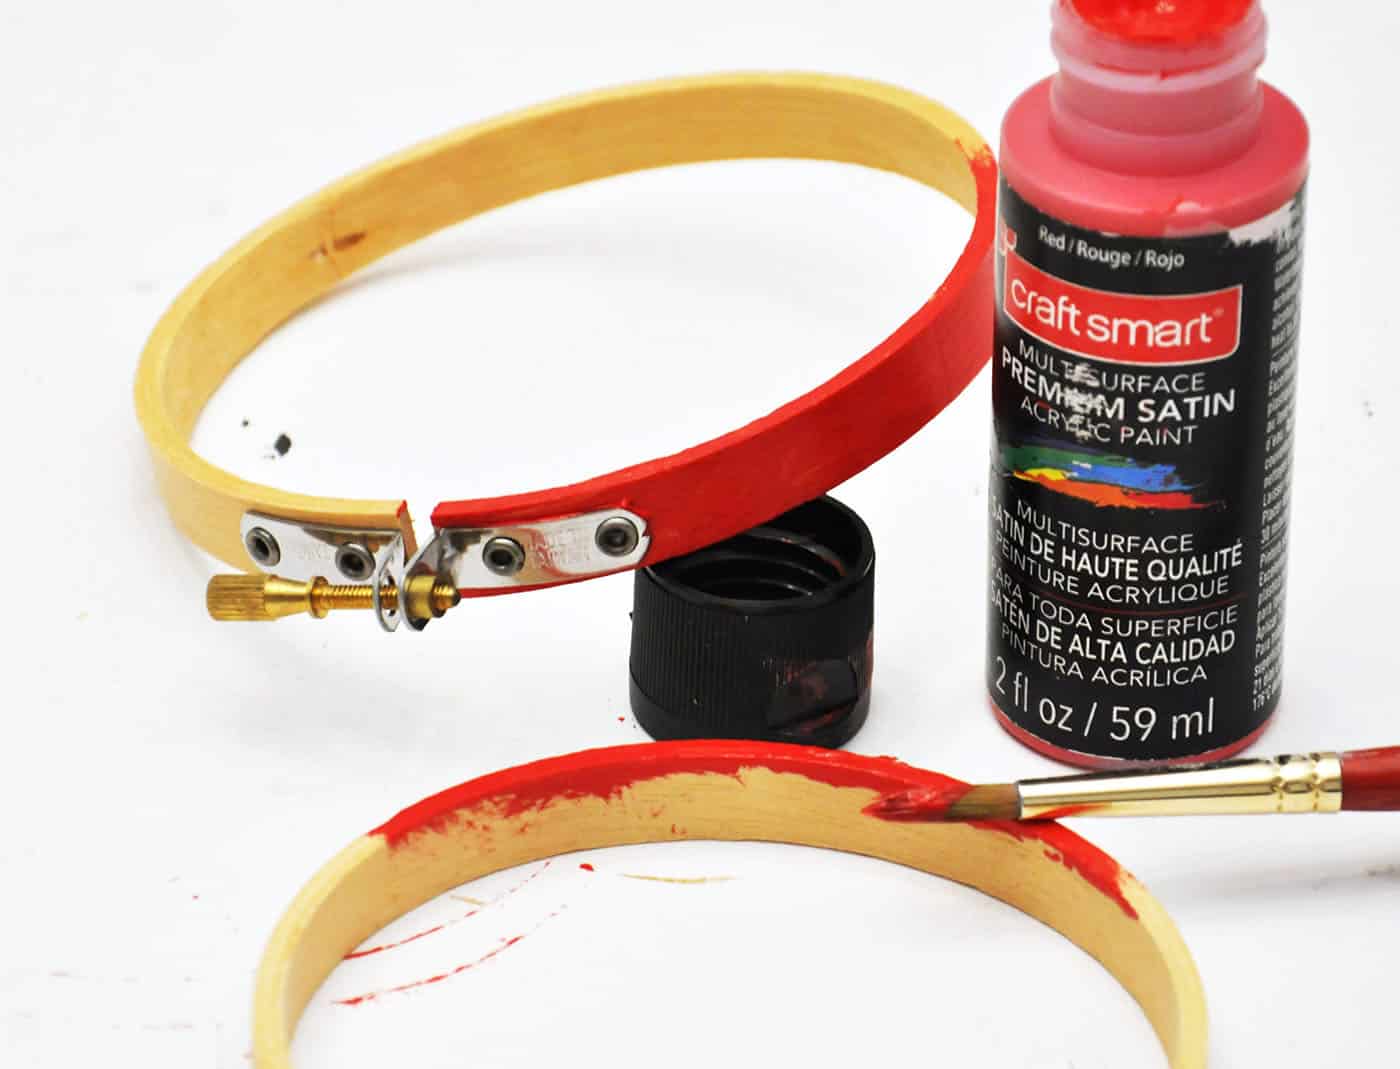 Painting an embroidery hoop with red paint